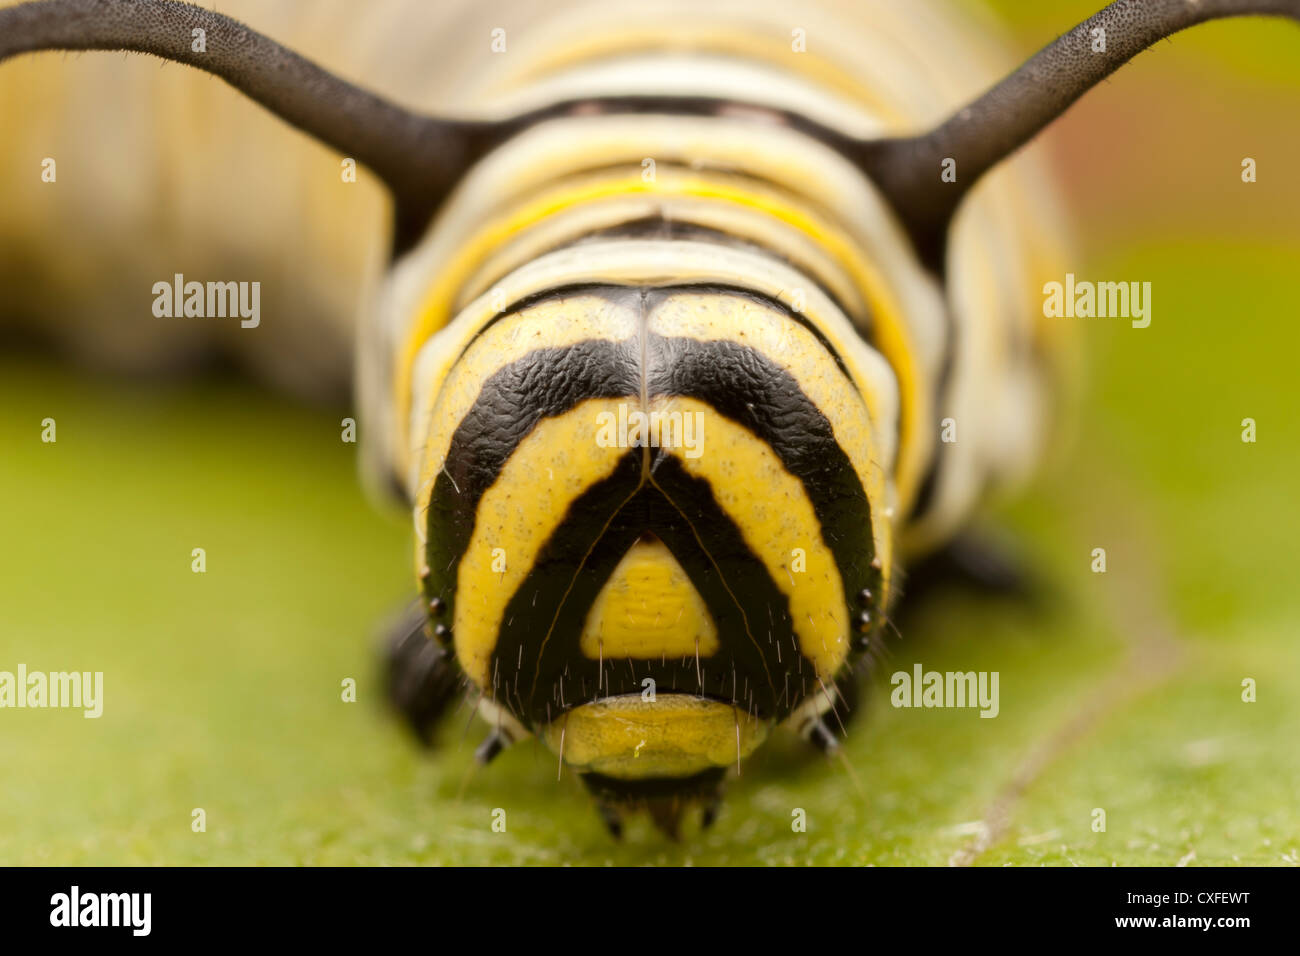 A frontal view of the head of a 5th instar Monarch Butterfly (Danaus Plexippus) caterpillar (larva) Stock Photo